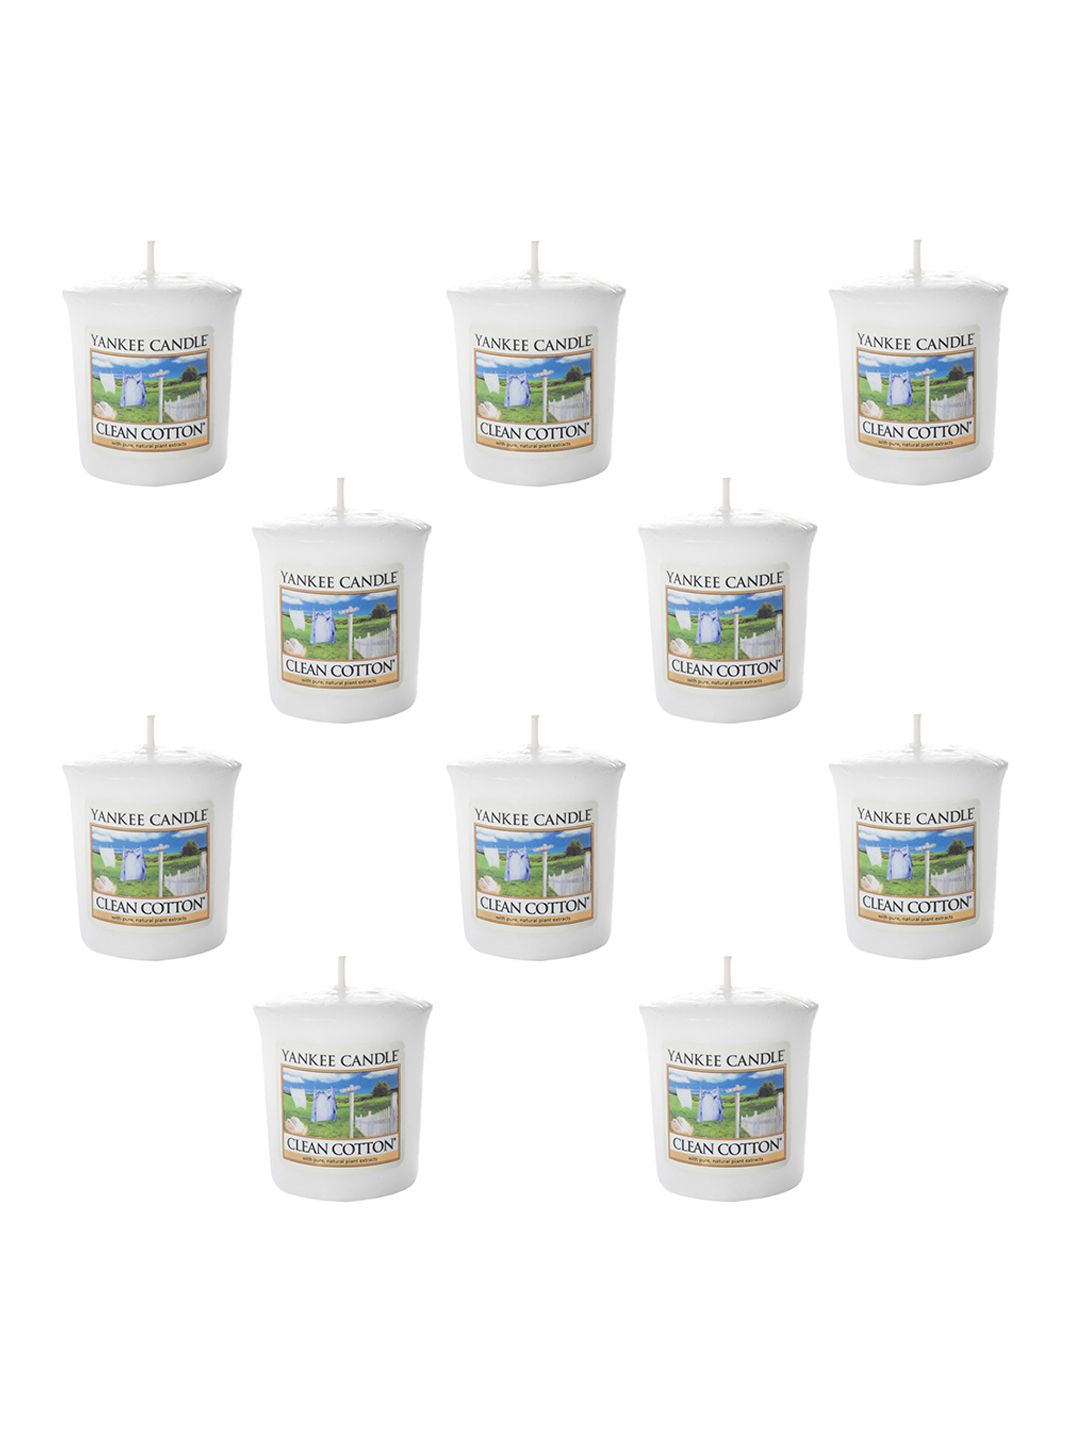 YANKEE CANDLE Set Of 10 Votive Clean Cotton Scented Candles Price in India